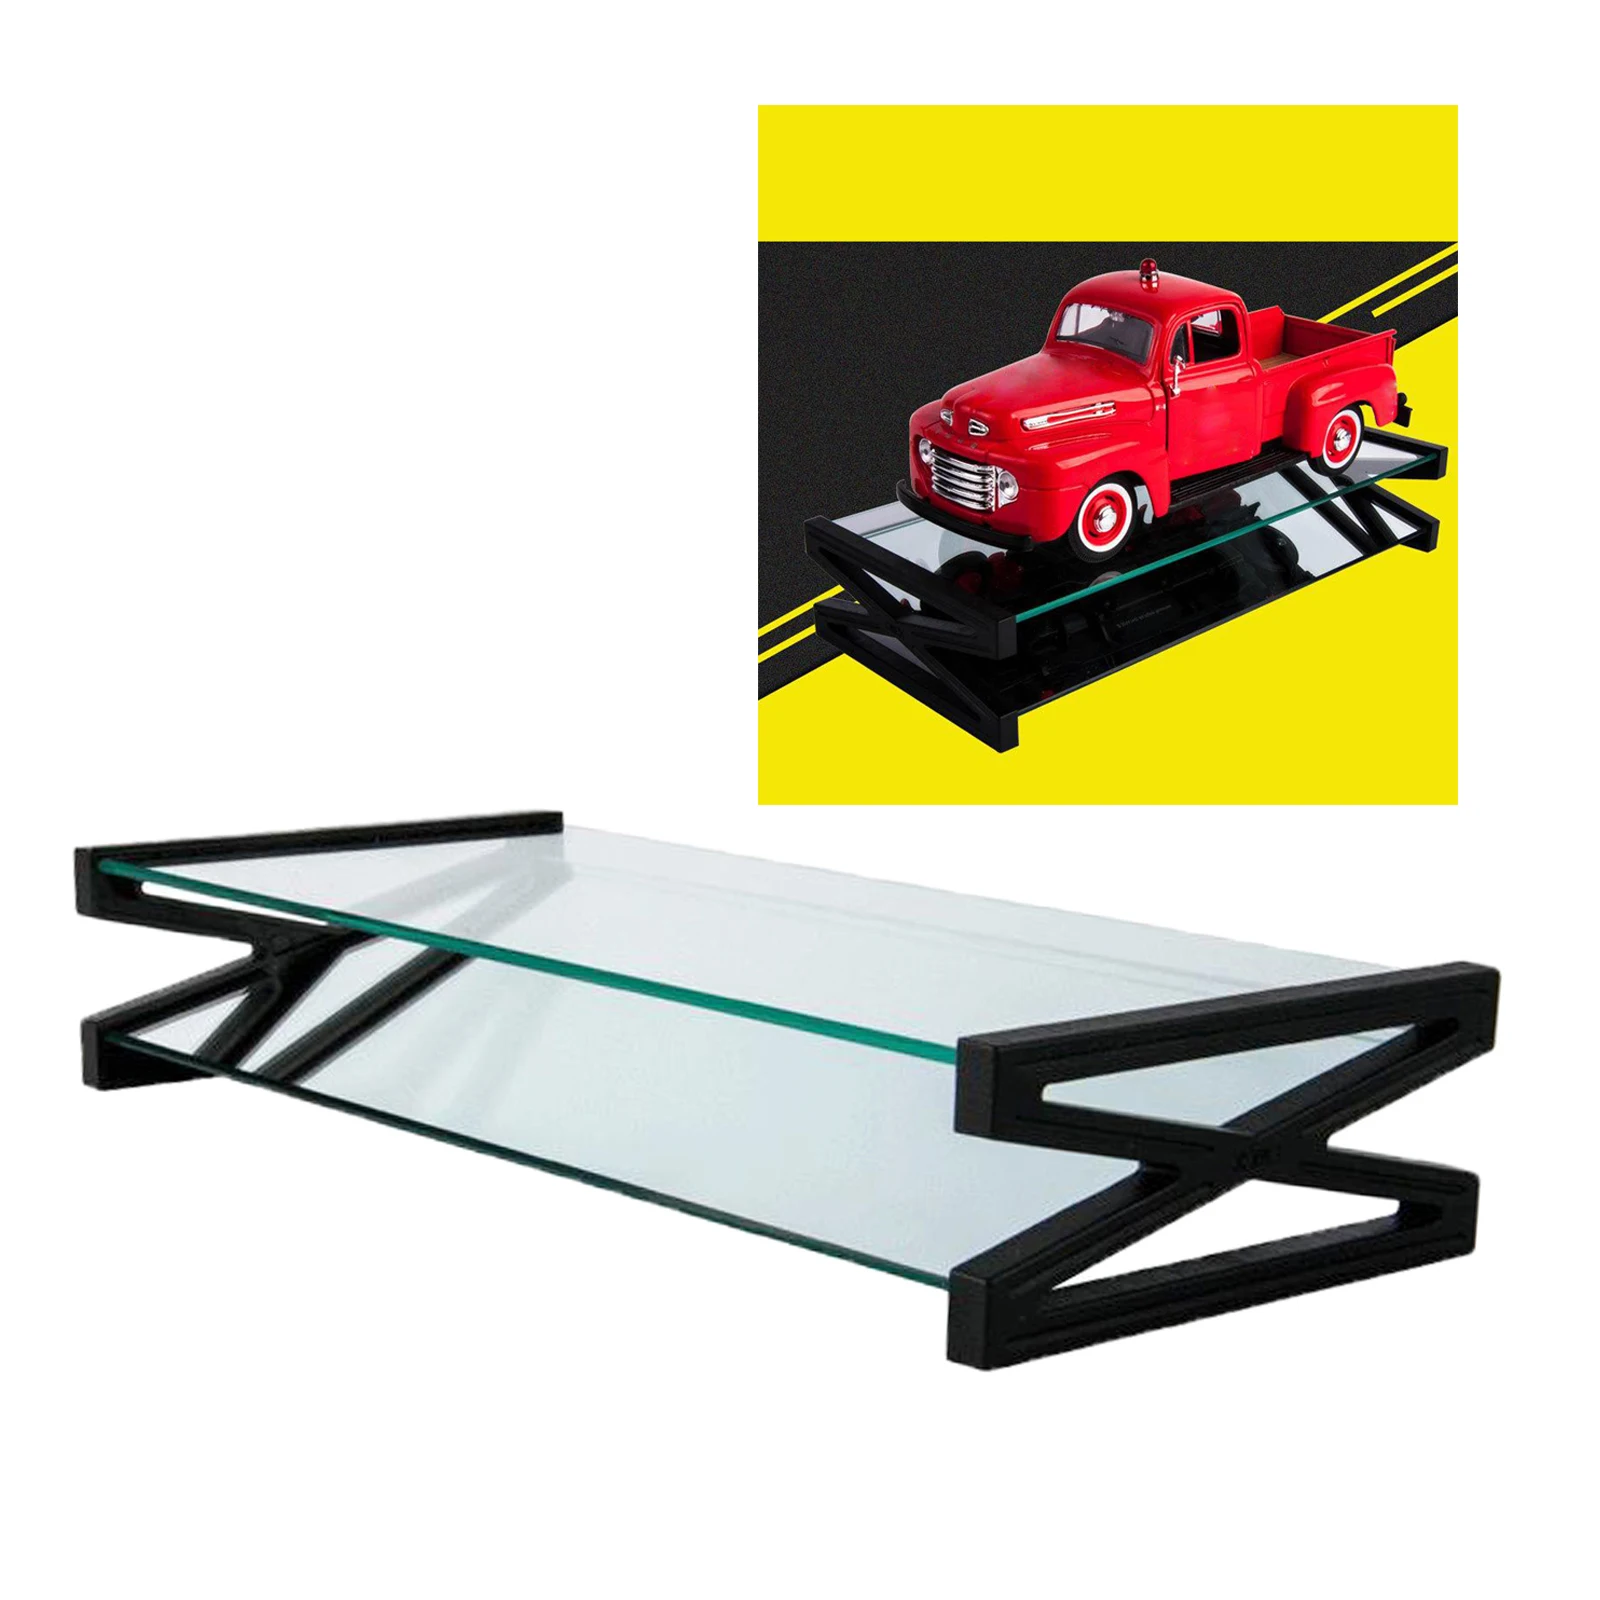 Transparent Universal Display Stand Base Case for Model Cars Collectibles